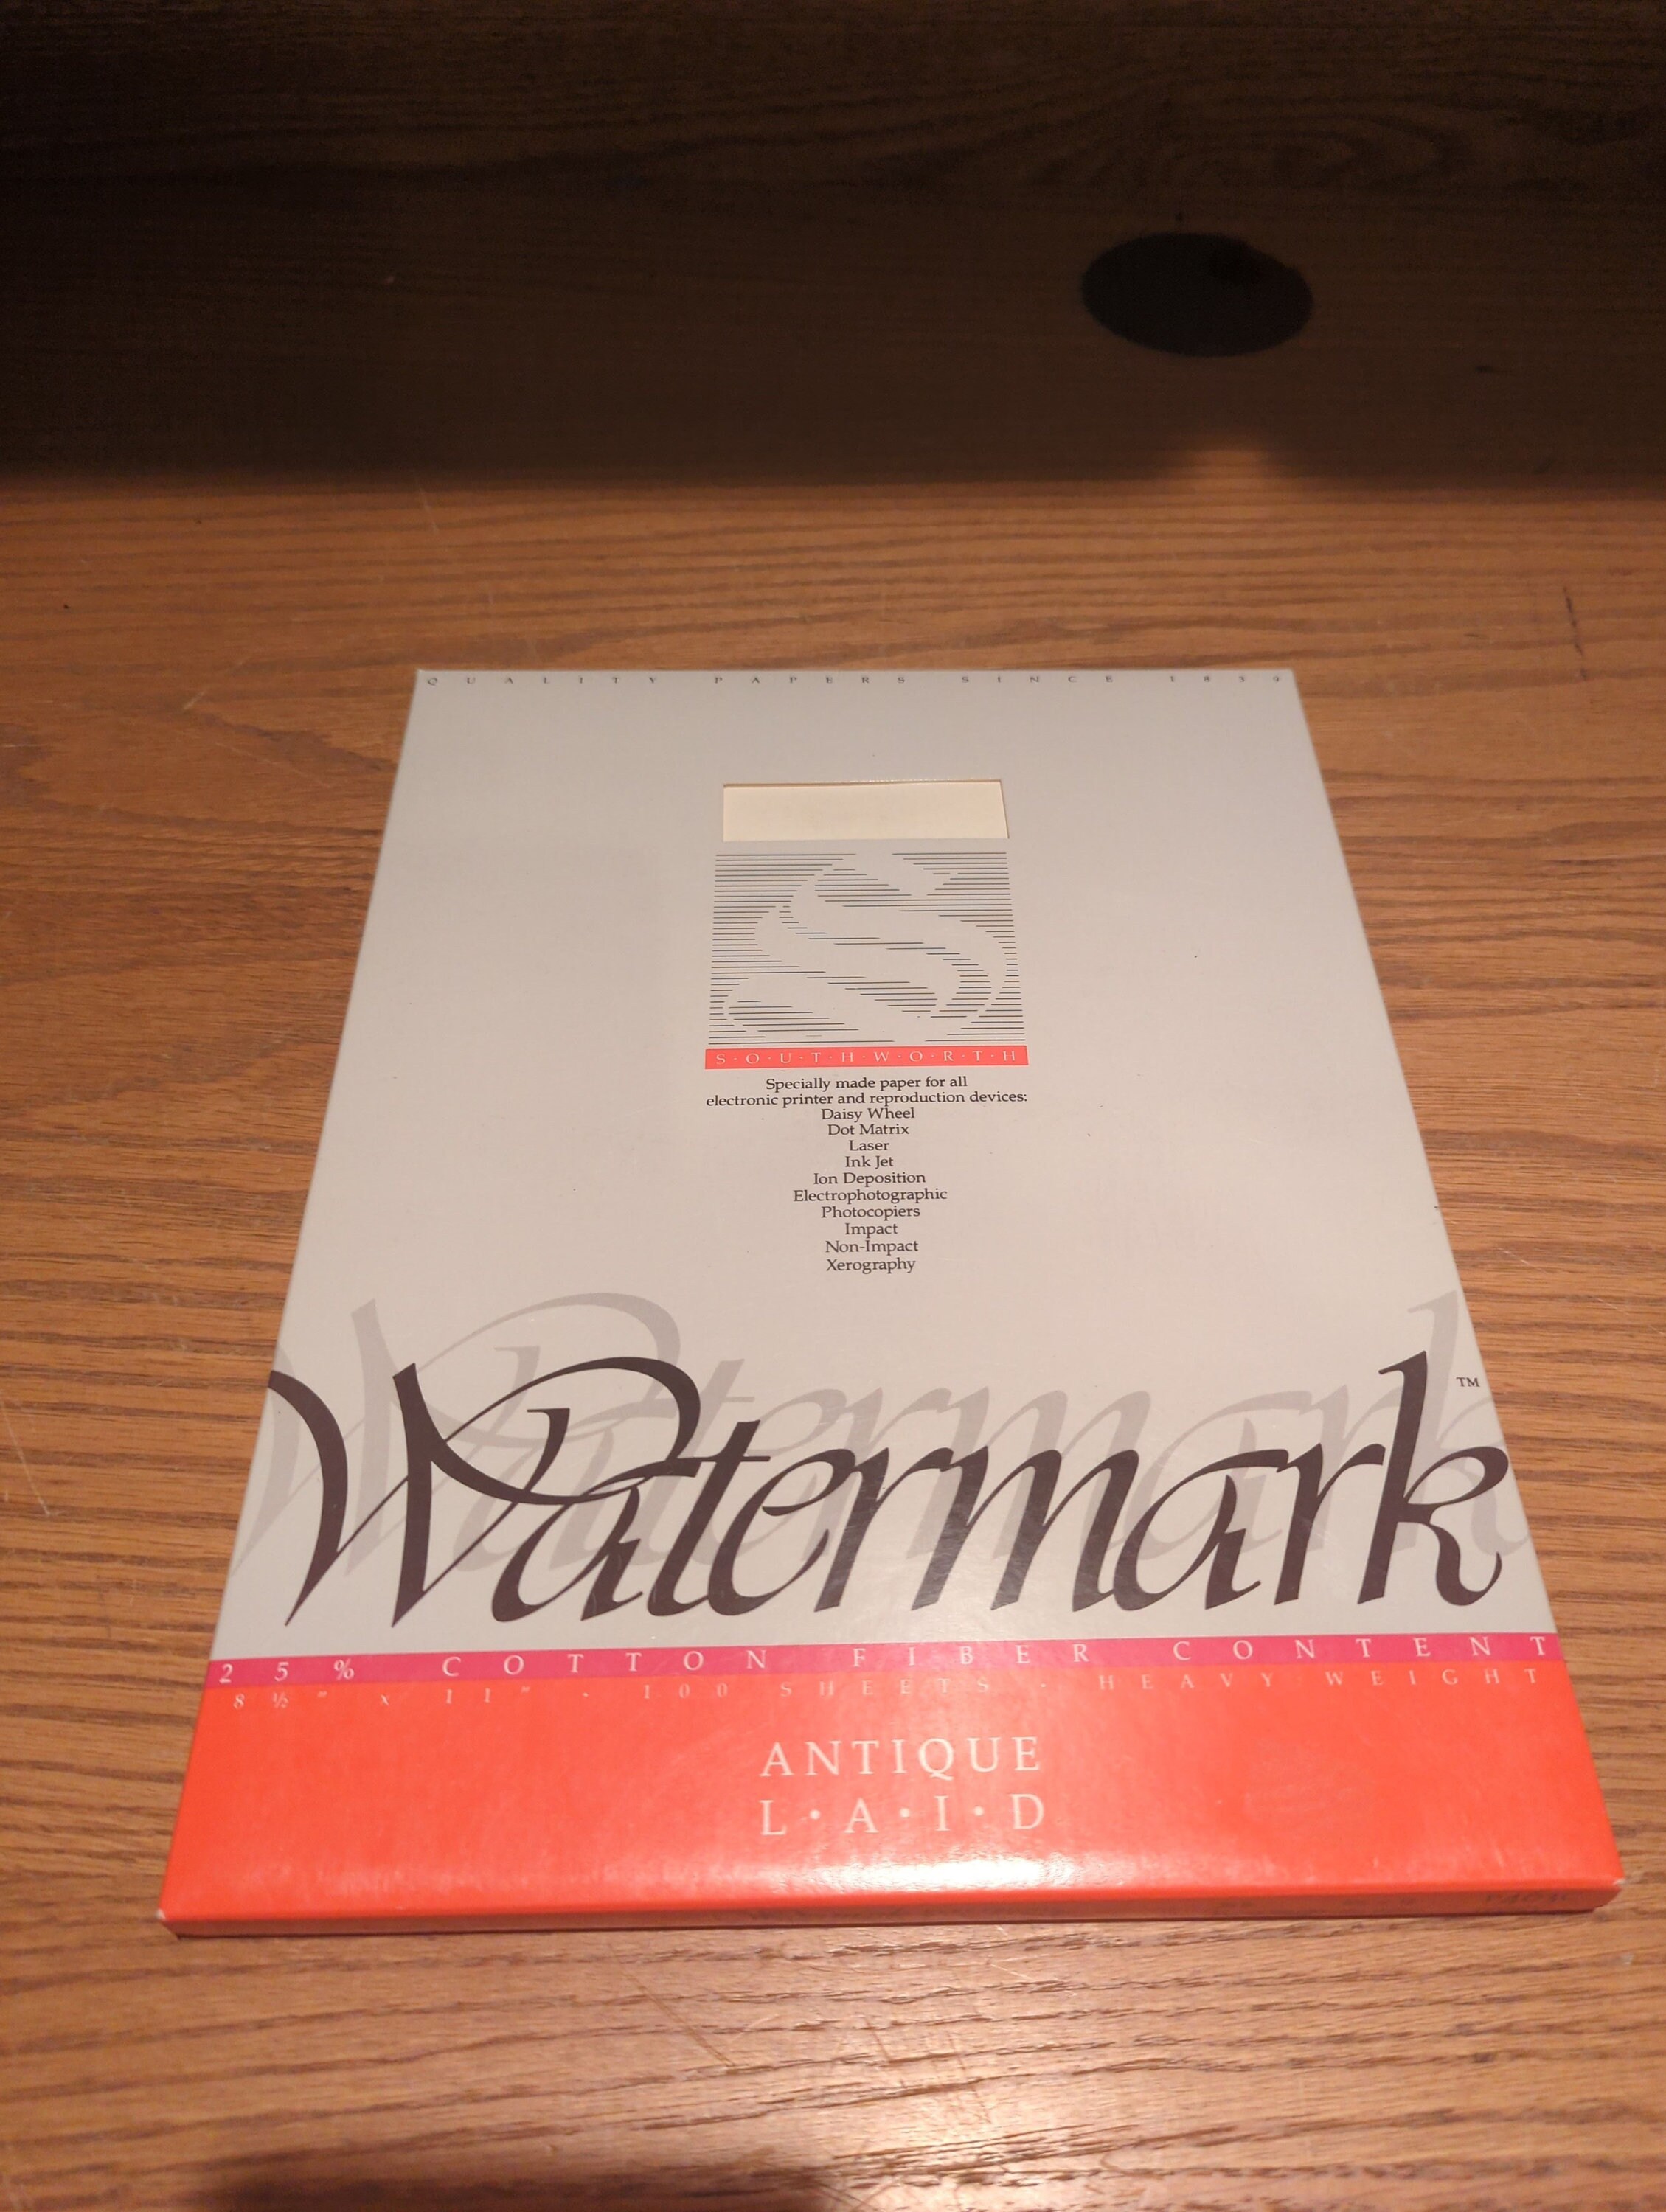 Vintage Typewriter Paper Southworth P412C Medium Weight 16 Lb Elegant  Watermarked Paper For Your Creative Writing Projects 25% Cotton